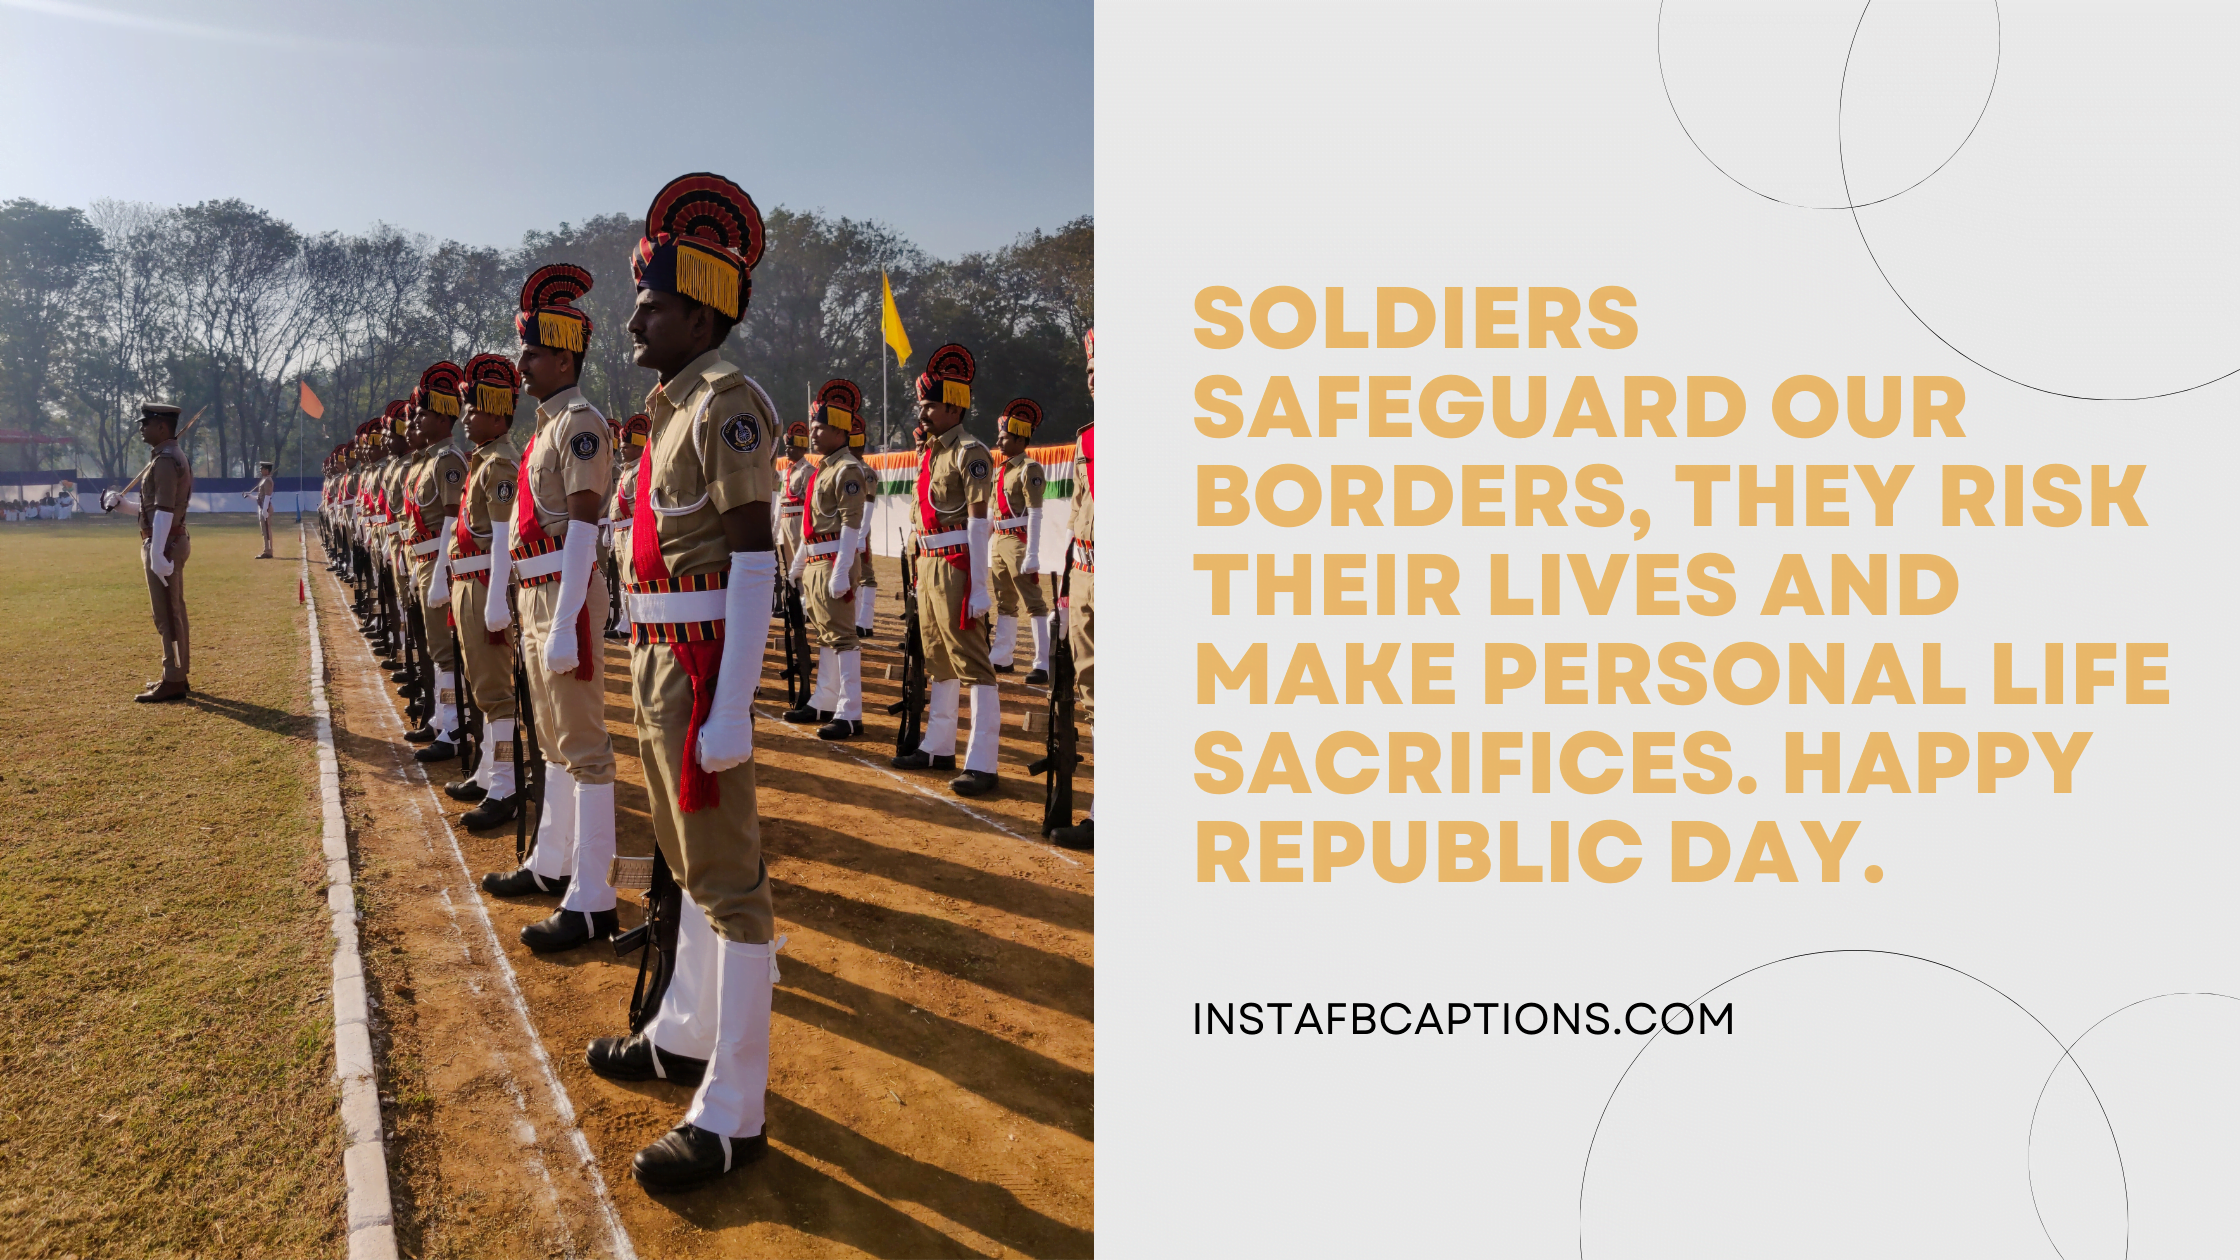 Soldiers safeguard our borders, they risk their lives and make personal life sacrifices. Happy republic day.  - Republic Day Captions for Soldiers - 190+ [New] Republic Day Captions Quotes For Instagram In 2023